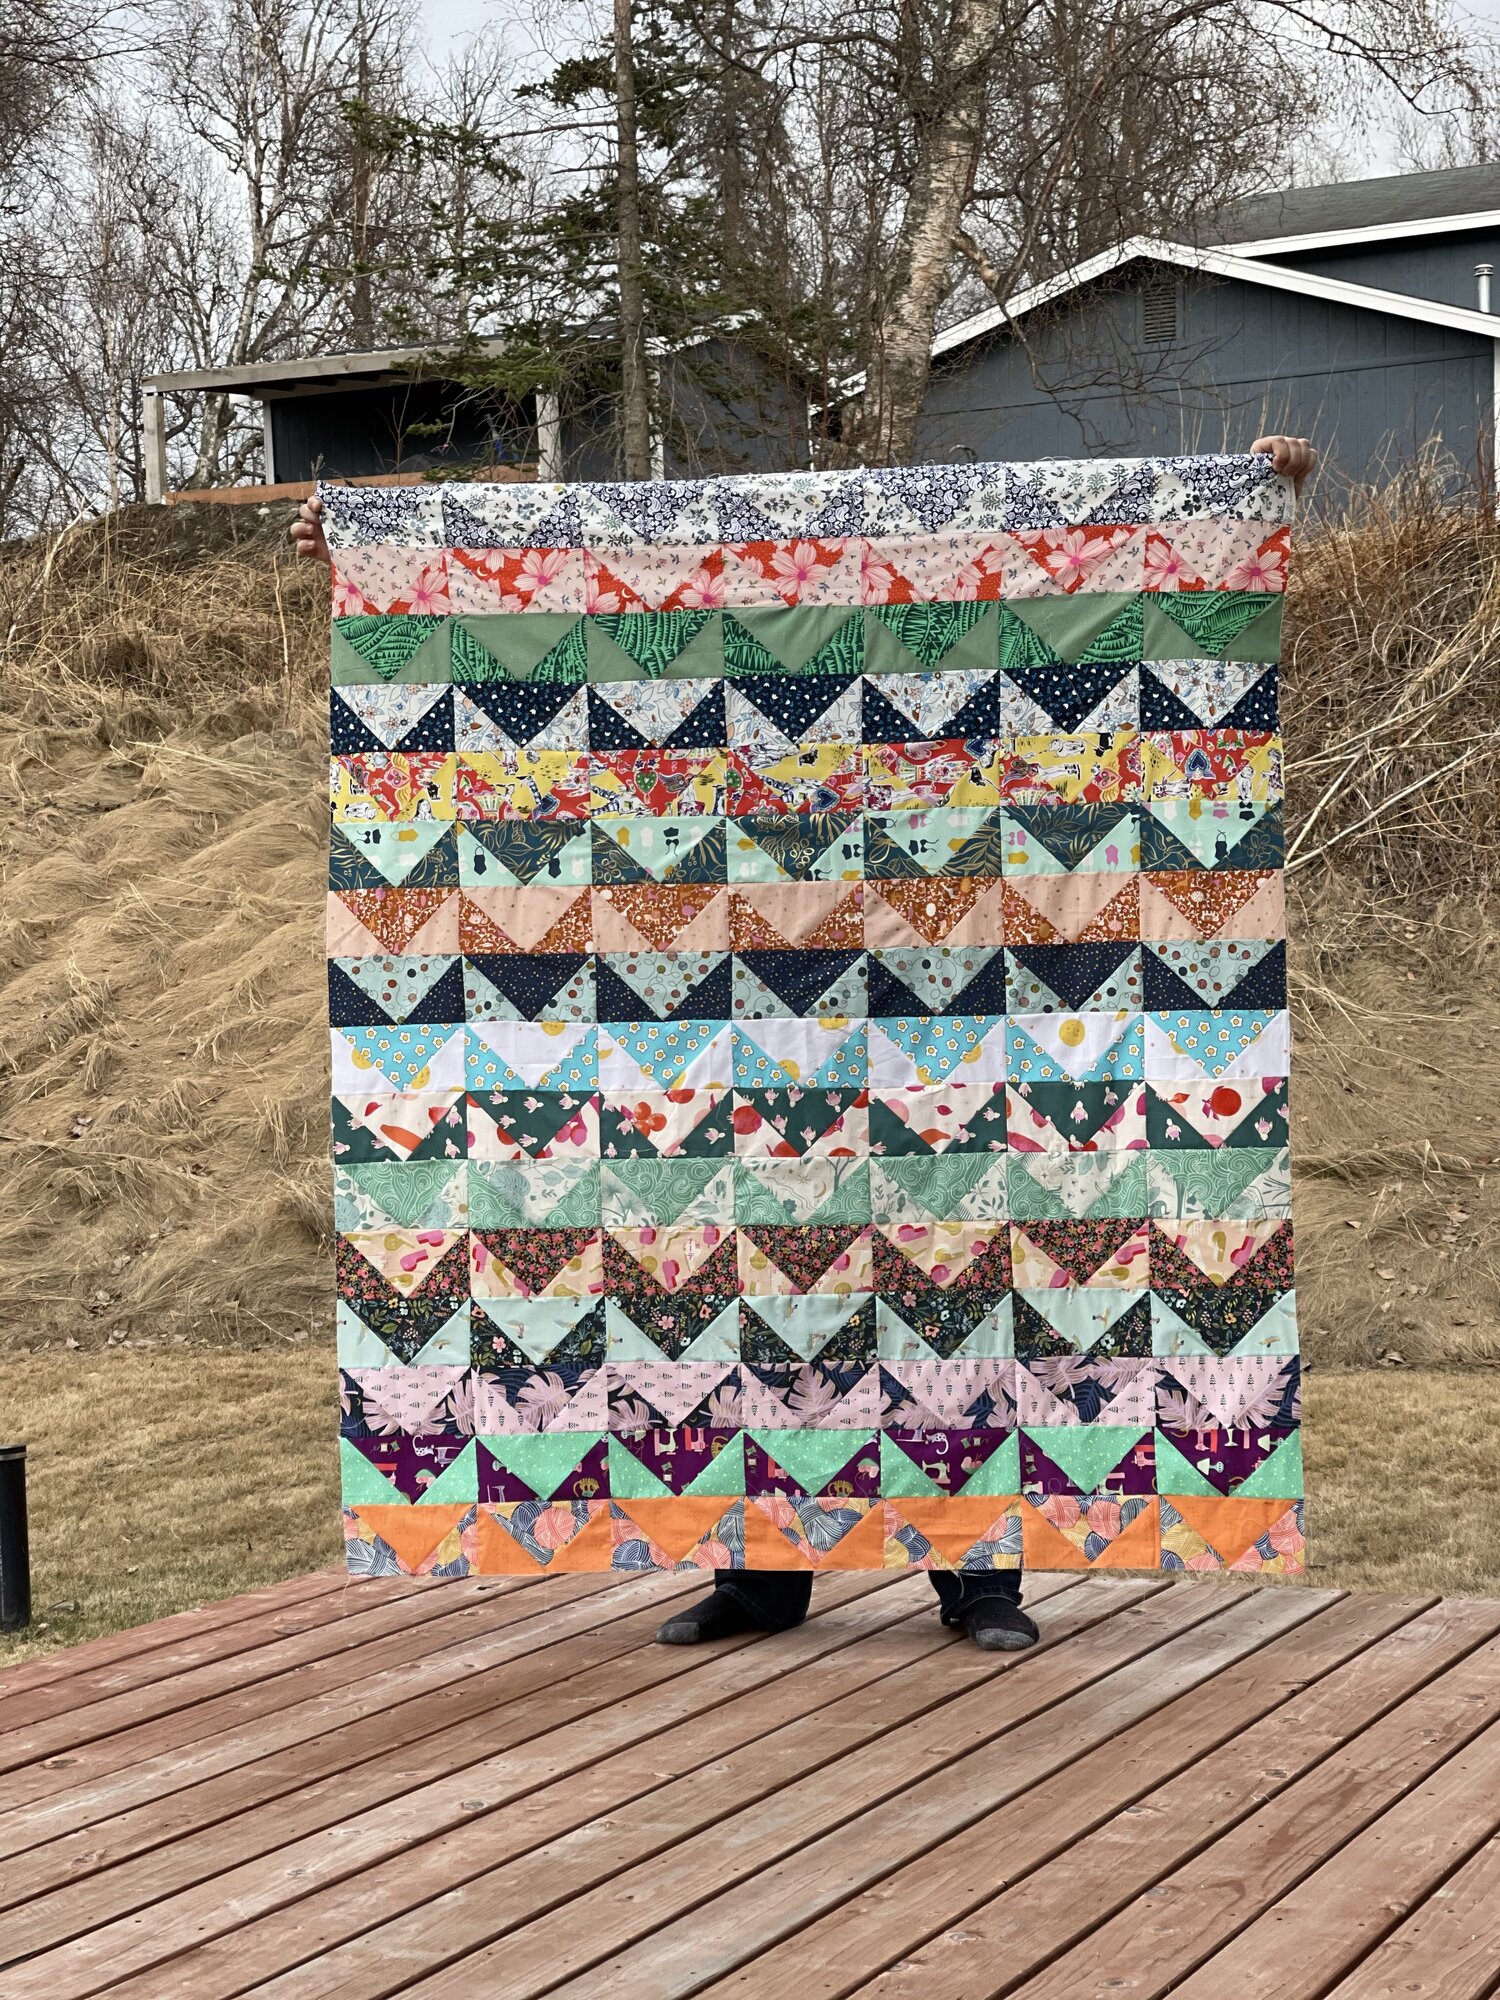 Andrea’s scrappy version is so colorful and I just adore the mix of prints she chose! She makes quilts, garments, accessories, and more - and shares them all the way from Alaska! You can find her on IG @akboredhousewife.